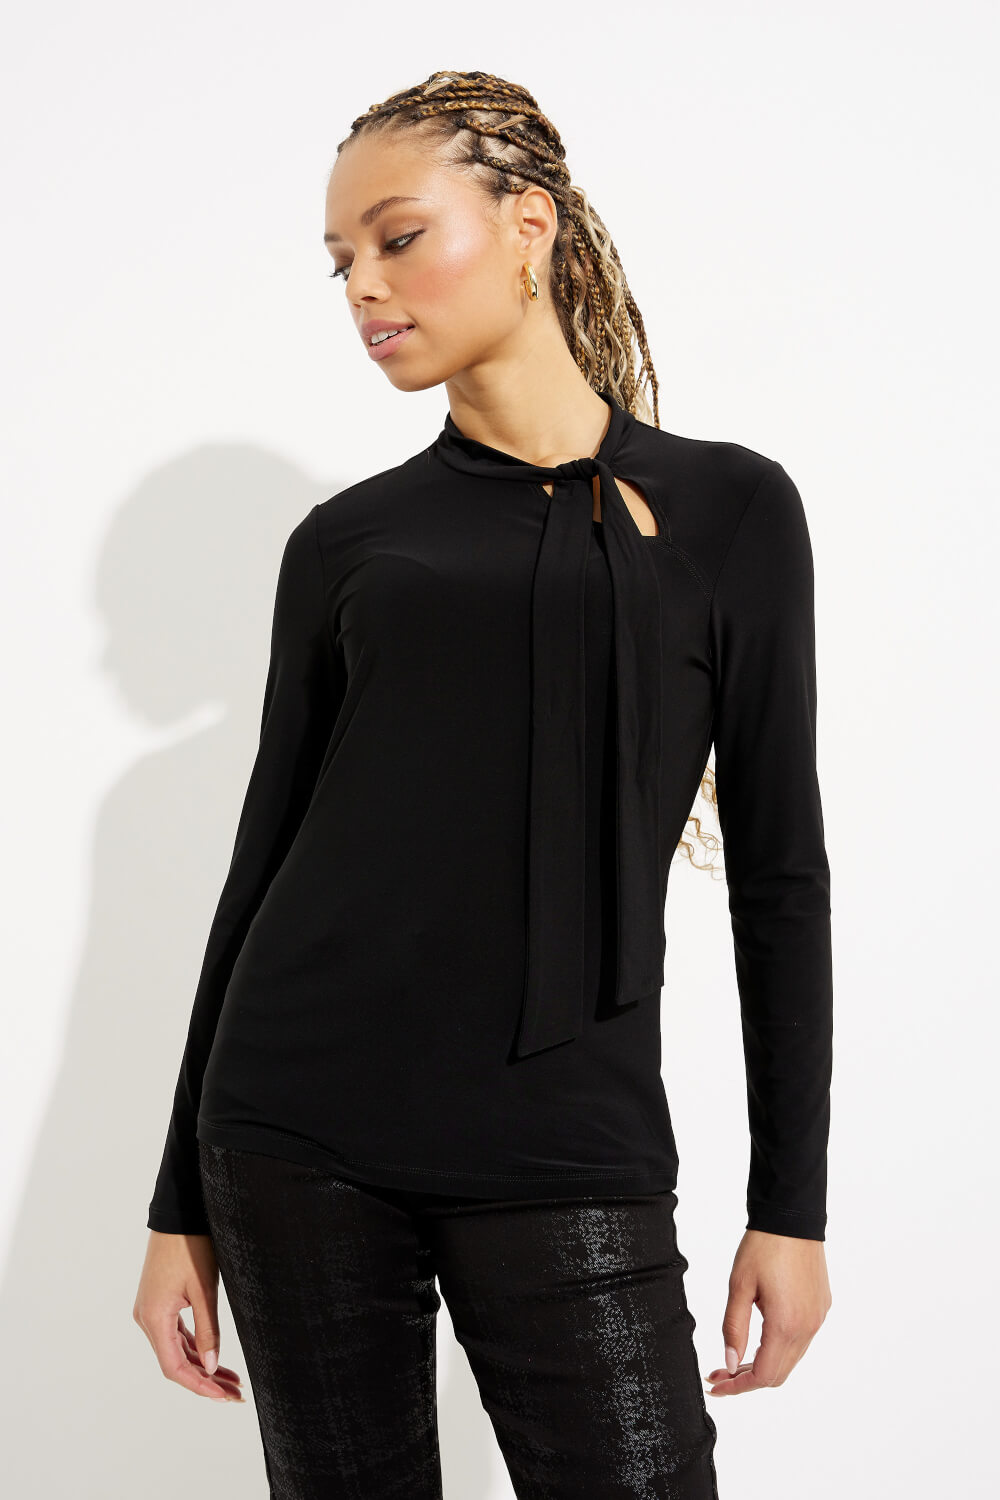 Bow Detail Top Style 233132. Black